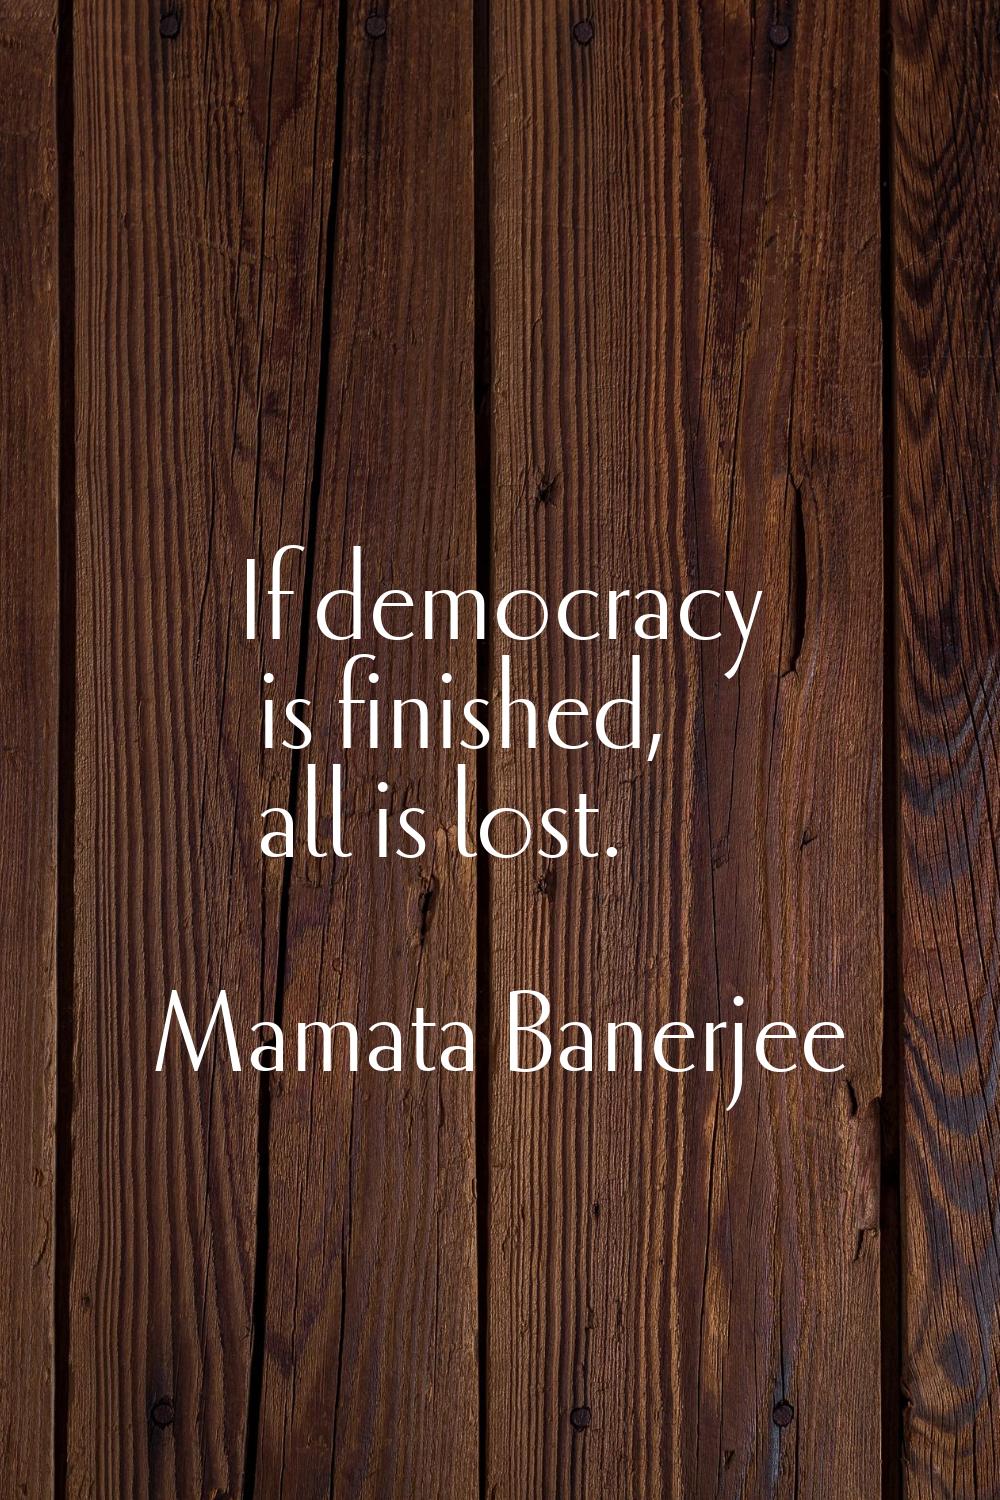 If democracy is finished, all is lost.